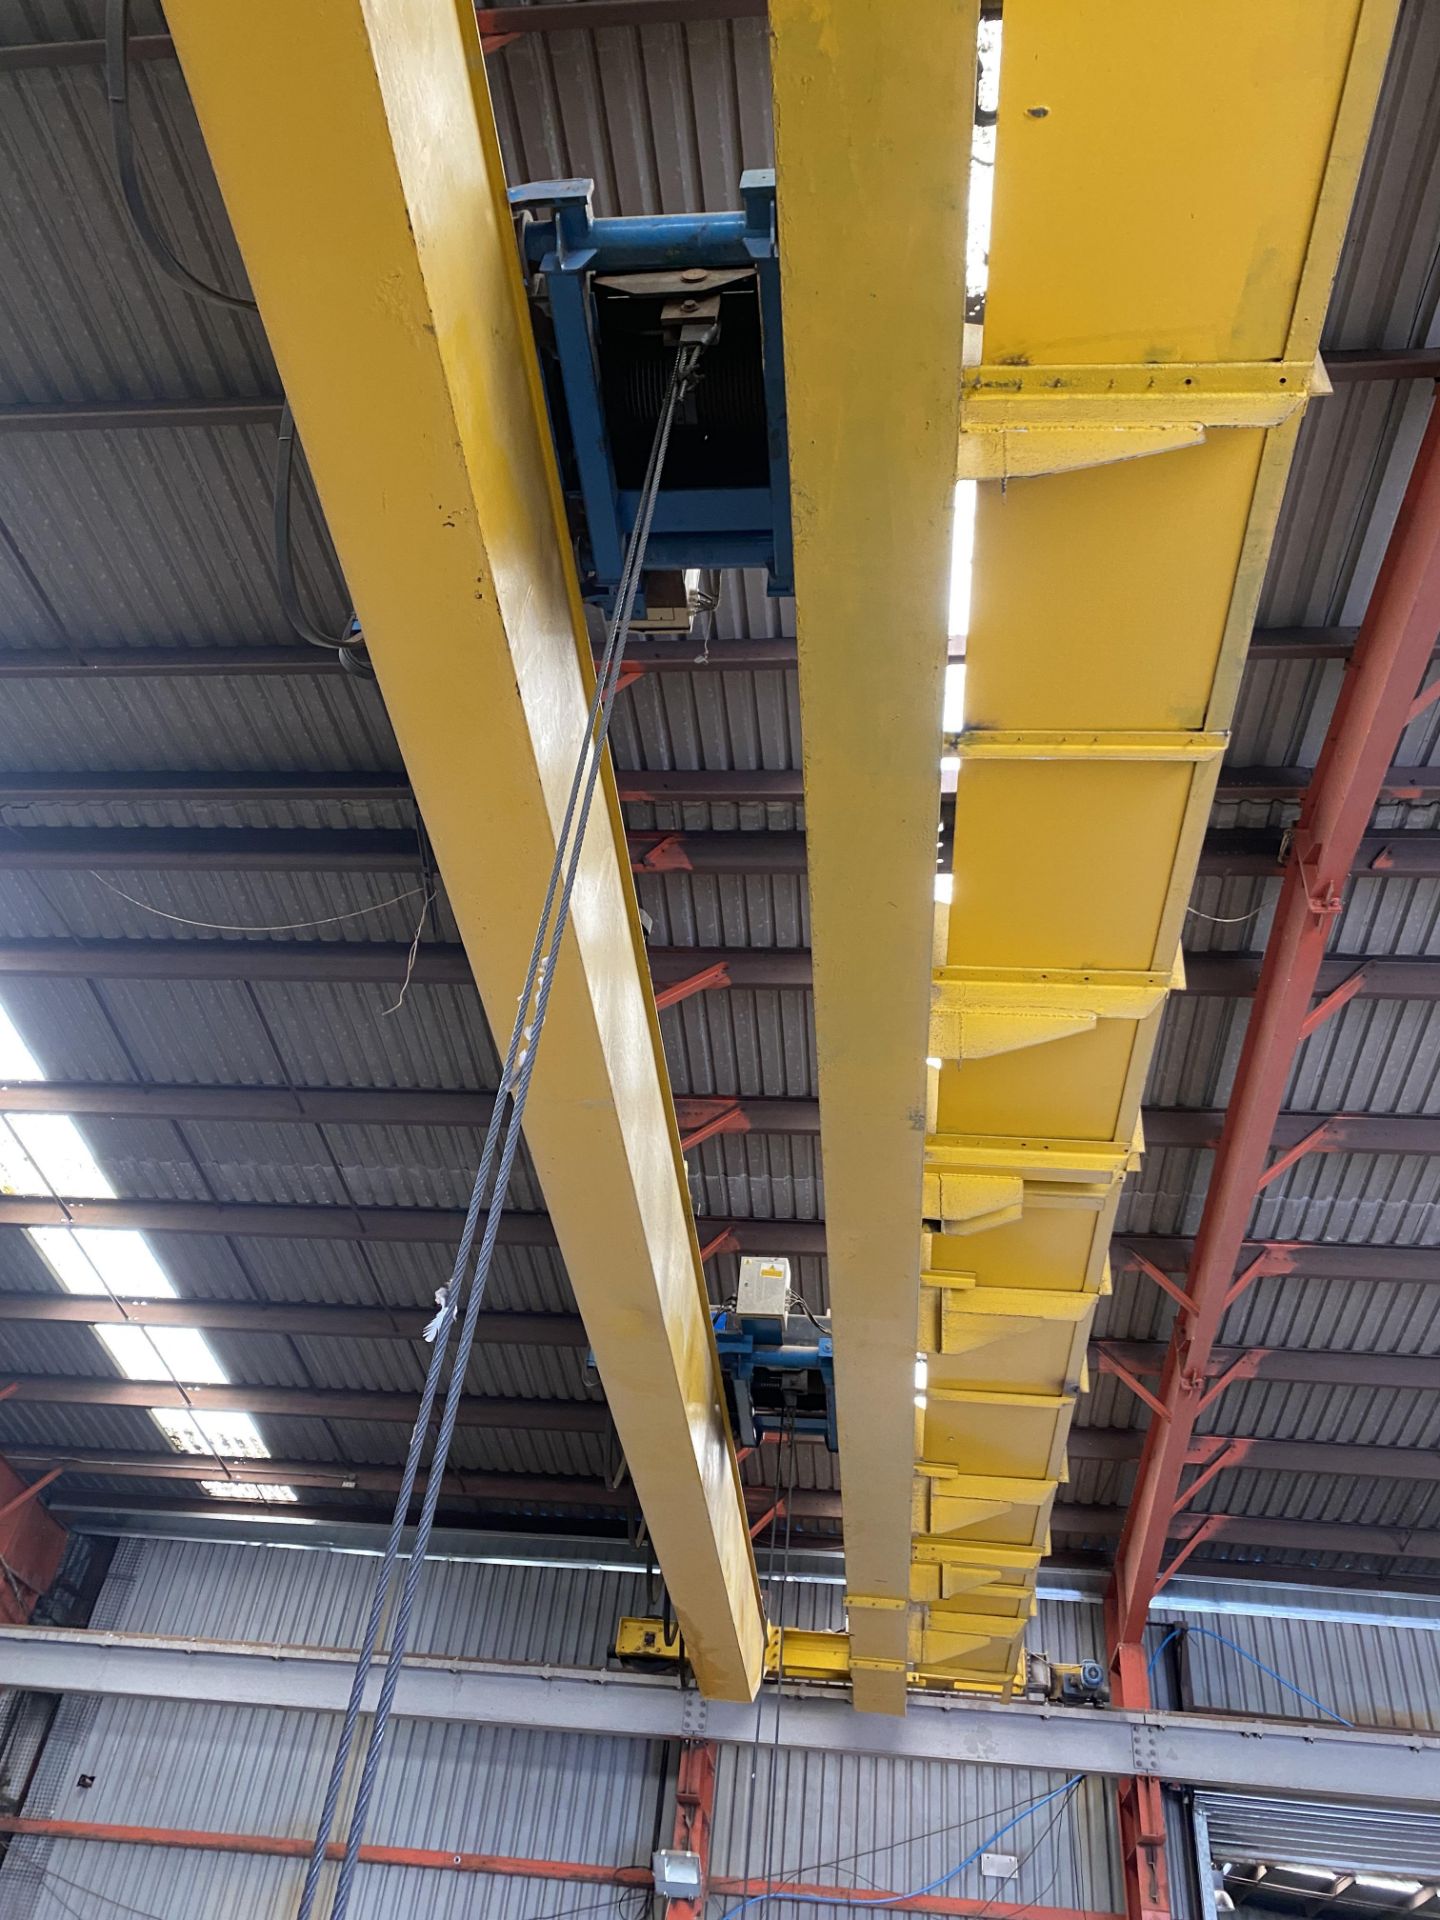 2 X 5T SWL TWIN GIRDER TRAVELLING OVERHEAD CRANE, reference no. CE212, approx. 18m span, with two - Image 3 of 7